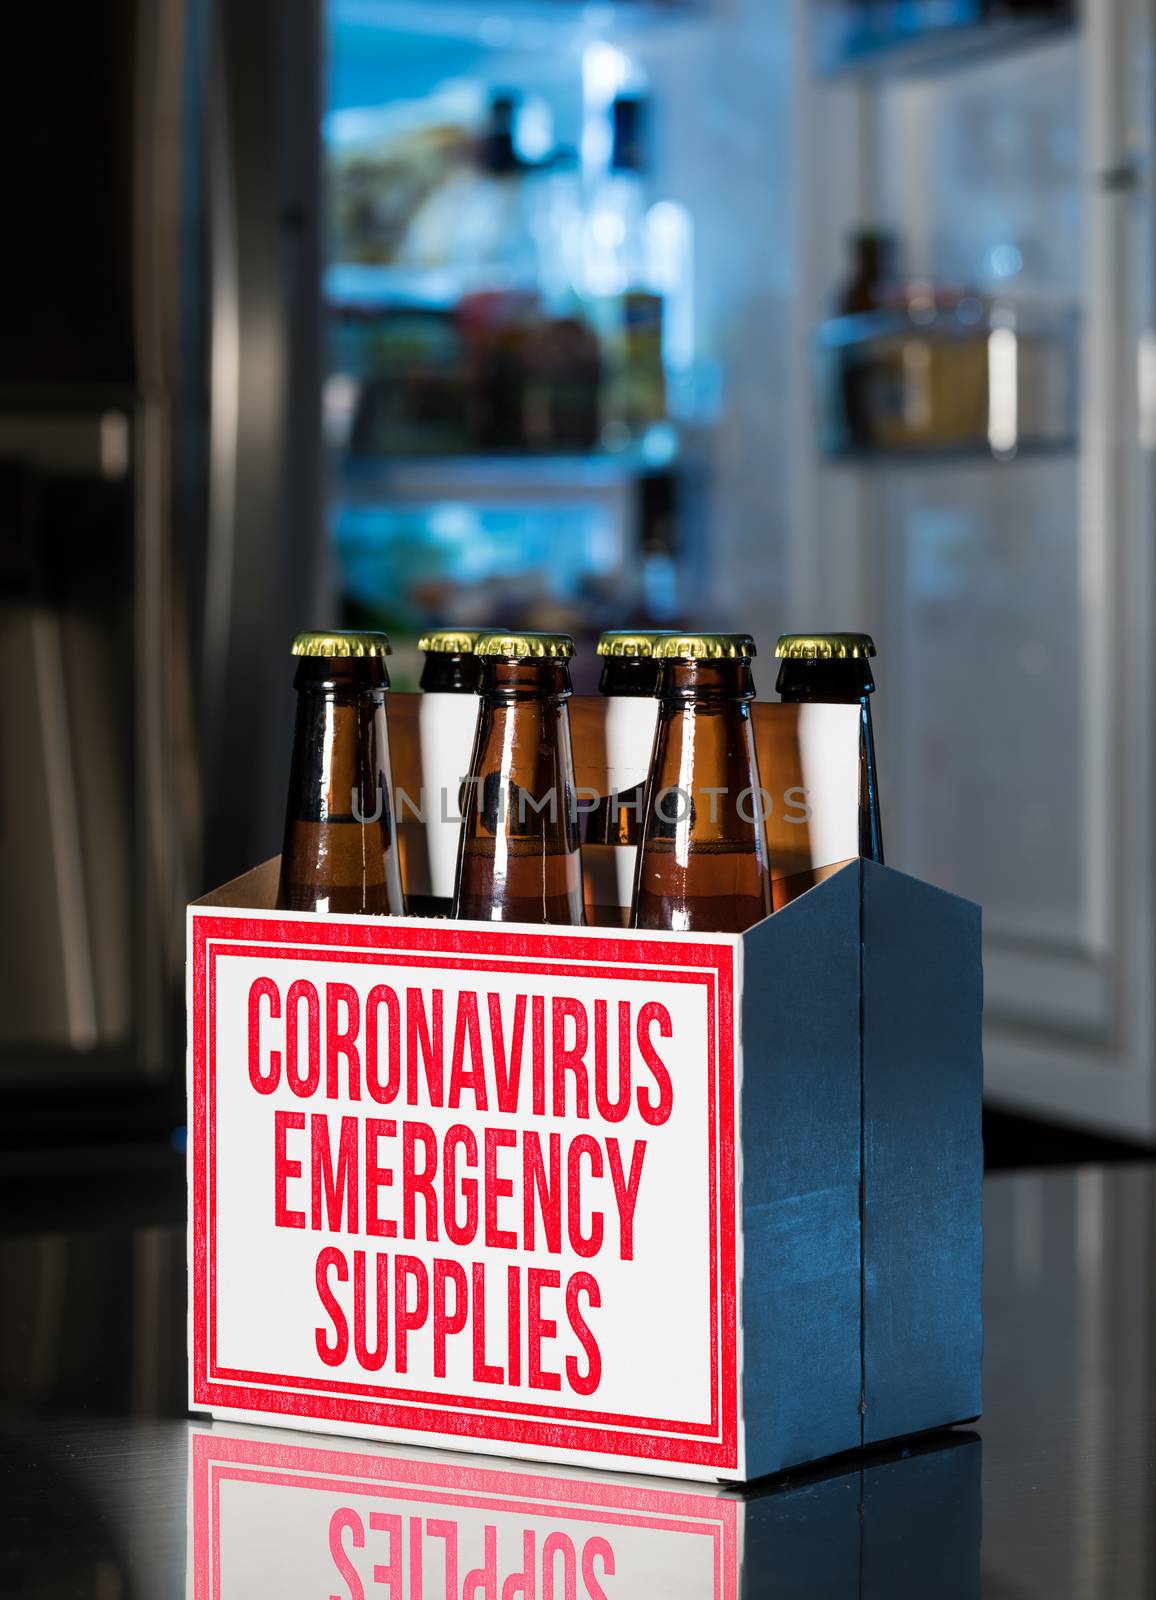 Six pack of brown beer bottles in box with Coronavirus Emergency Supplies stamped on side. Cold fridge out of focus in rear. Humorous view of hoarding